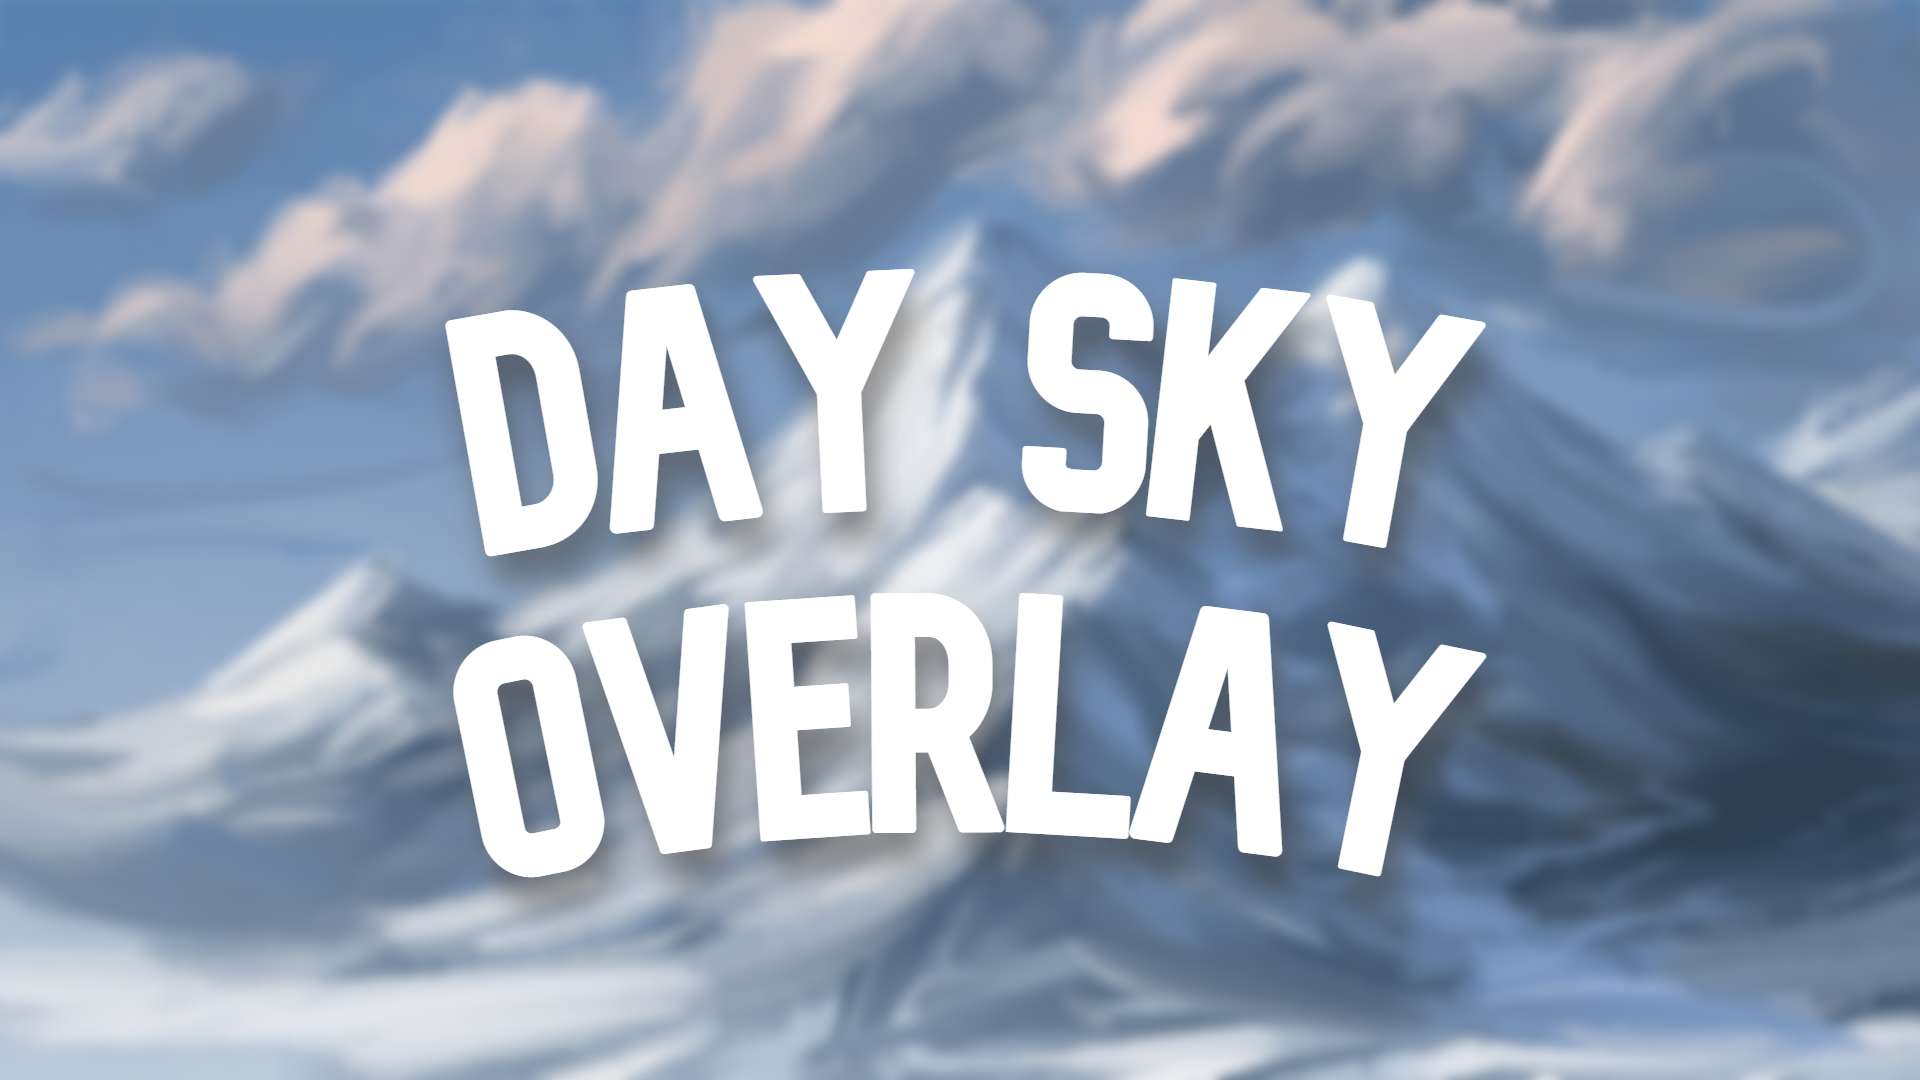 Gallery Banner for Day Sky Overlay #7 on PvPRP